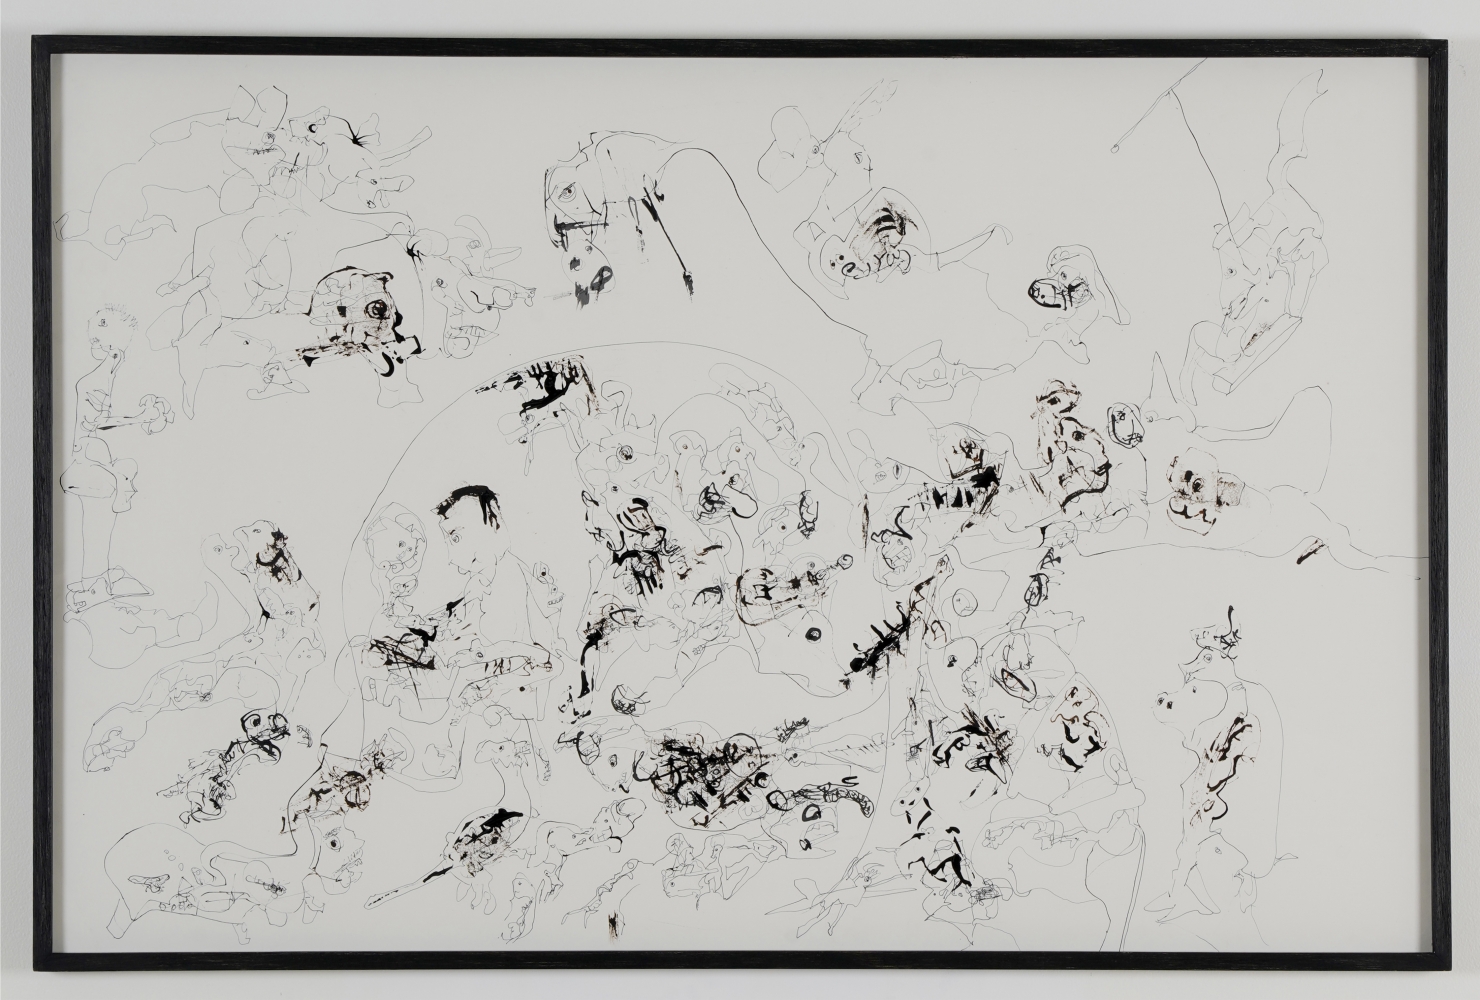 P.R.&amp;nbsp;SATHEESH

Untitled (2), 2020

Indian ink on paper

26.1 x 40 in / 66.5 x 101.5 cm